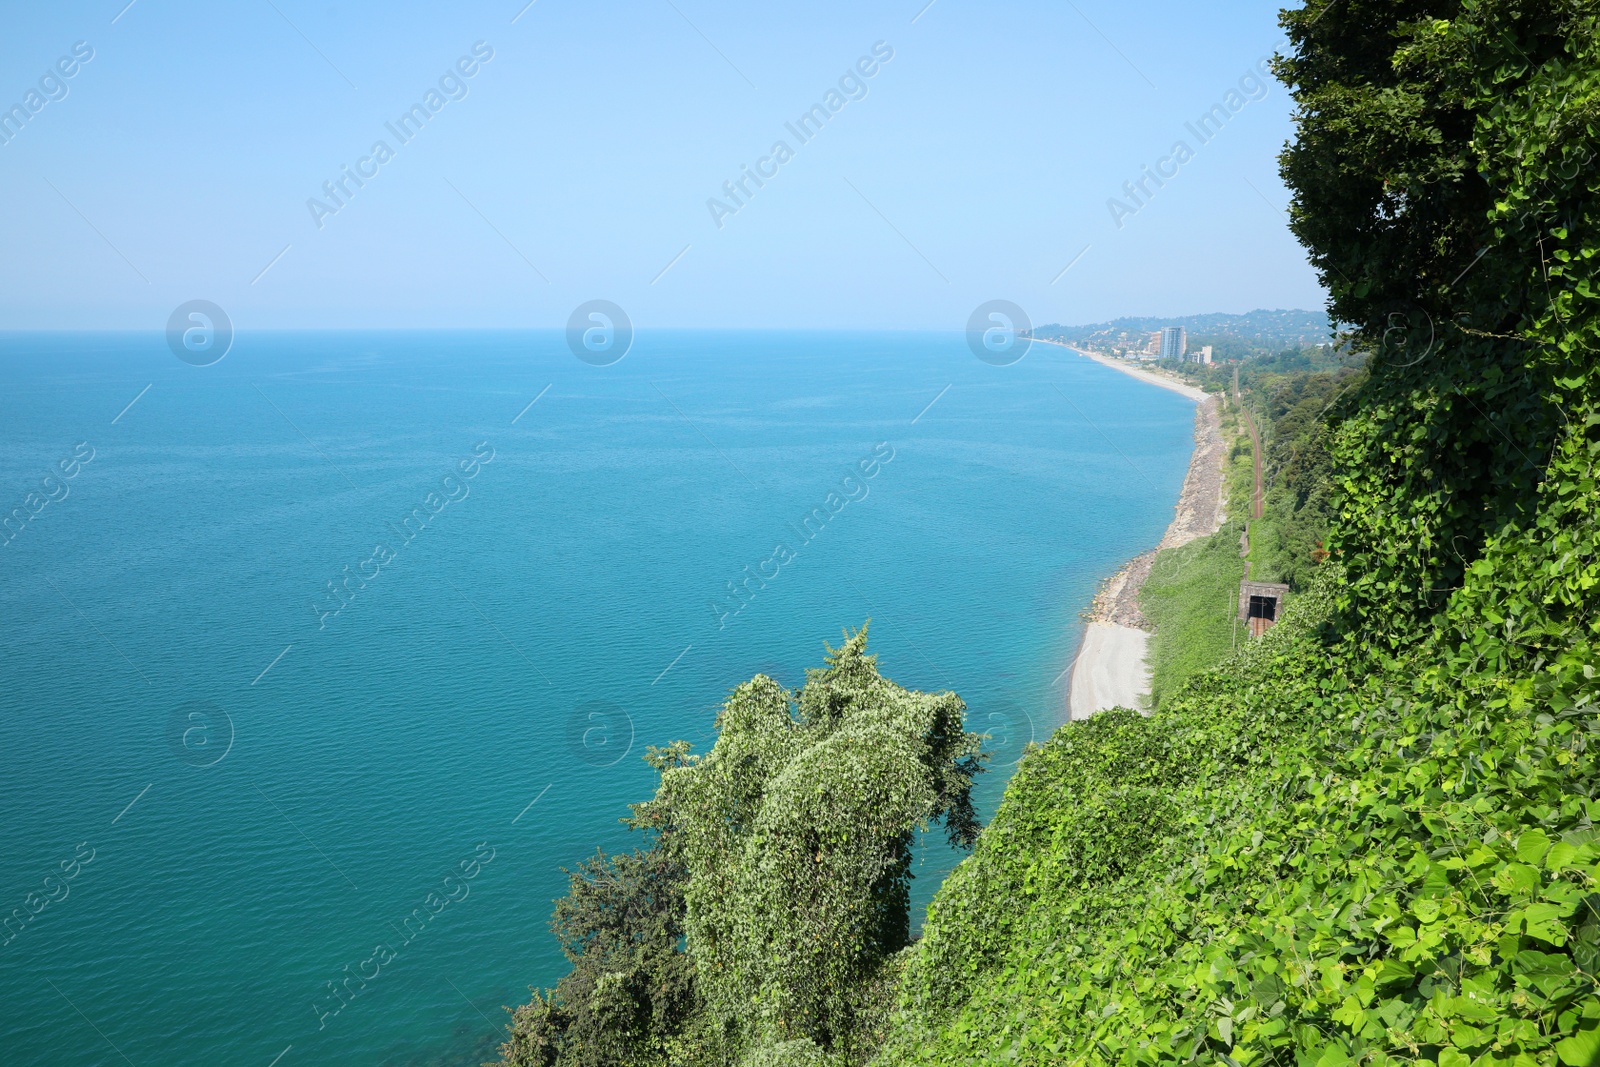 Photo of Picturesque view of green hills and sea